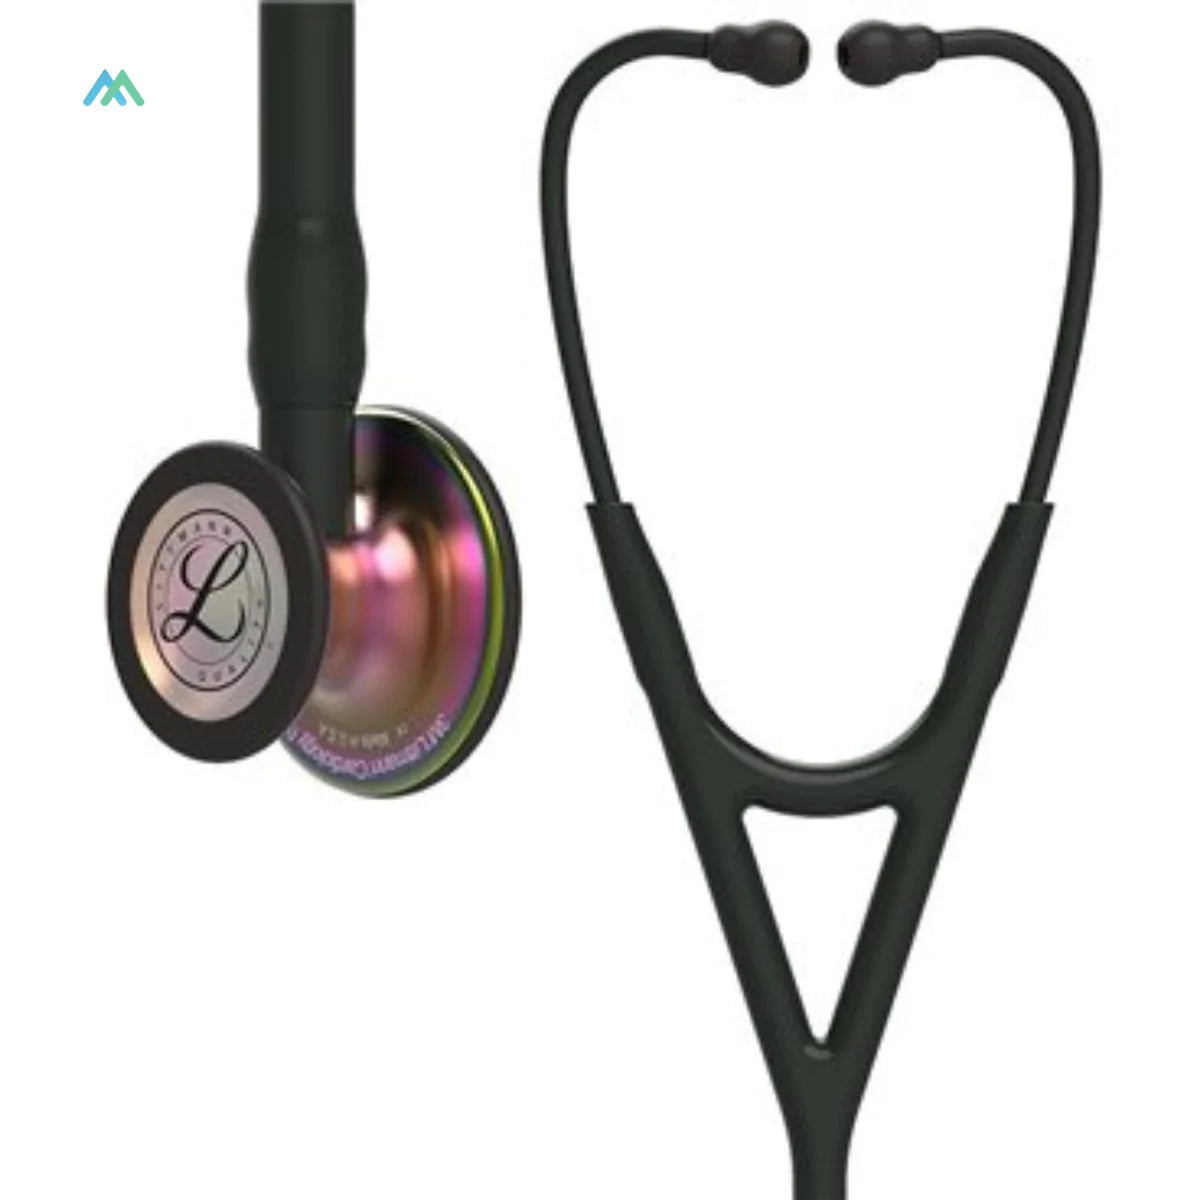 3M™ Littmann® Cardiology IV™ Diagnostic Stethoscope Special Black with Rainbow Finish  Edition 6165 - Littmann Special Black-Rainbow 6165 Cardiology 4 Stethoscope in Pakistan - Littmann Cardio IV All Editions Stethoscopes in Pakistan